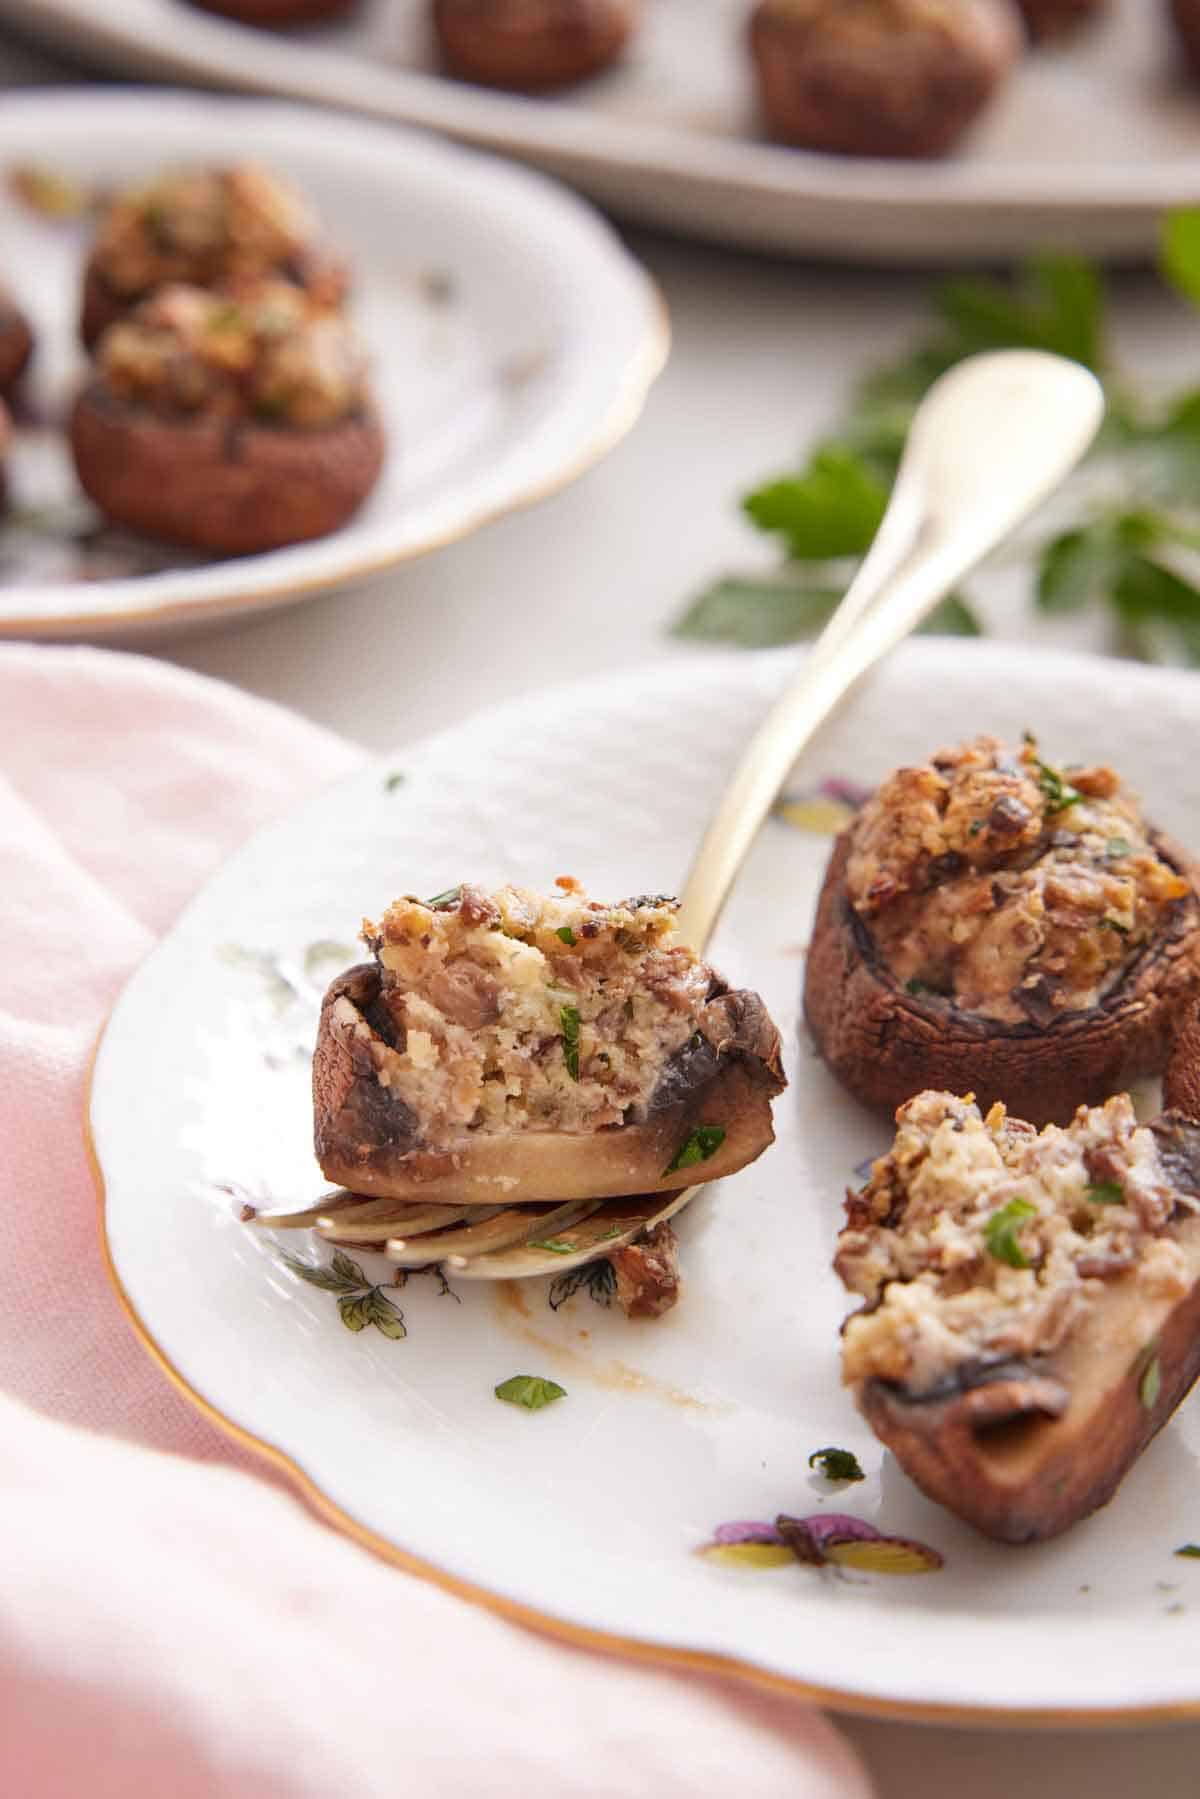 A close up view of a stuffed mushroom on top of a fork.